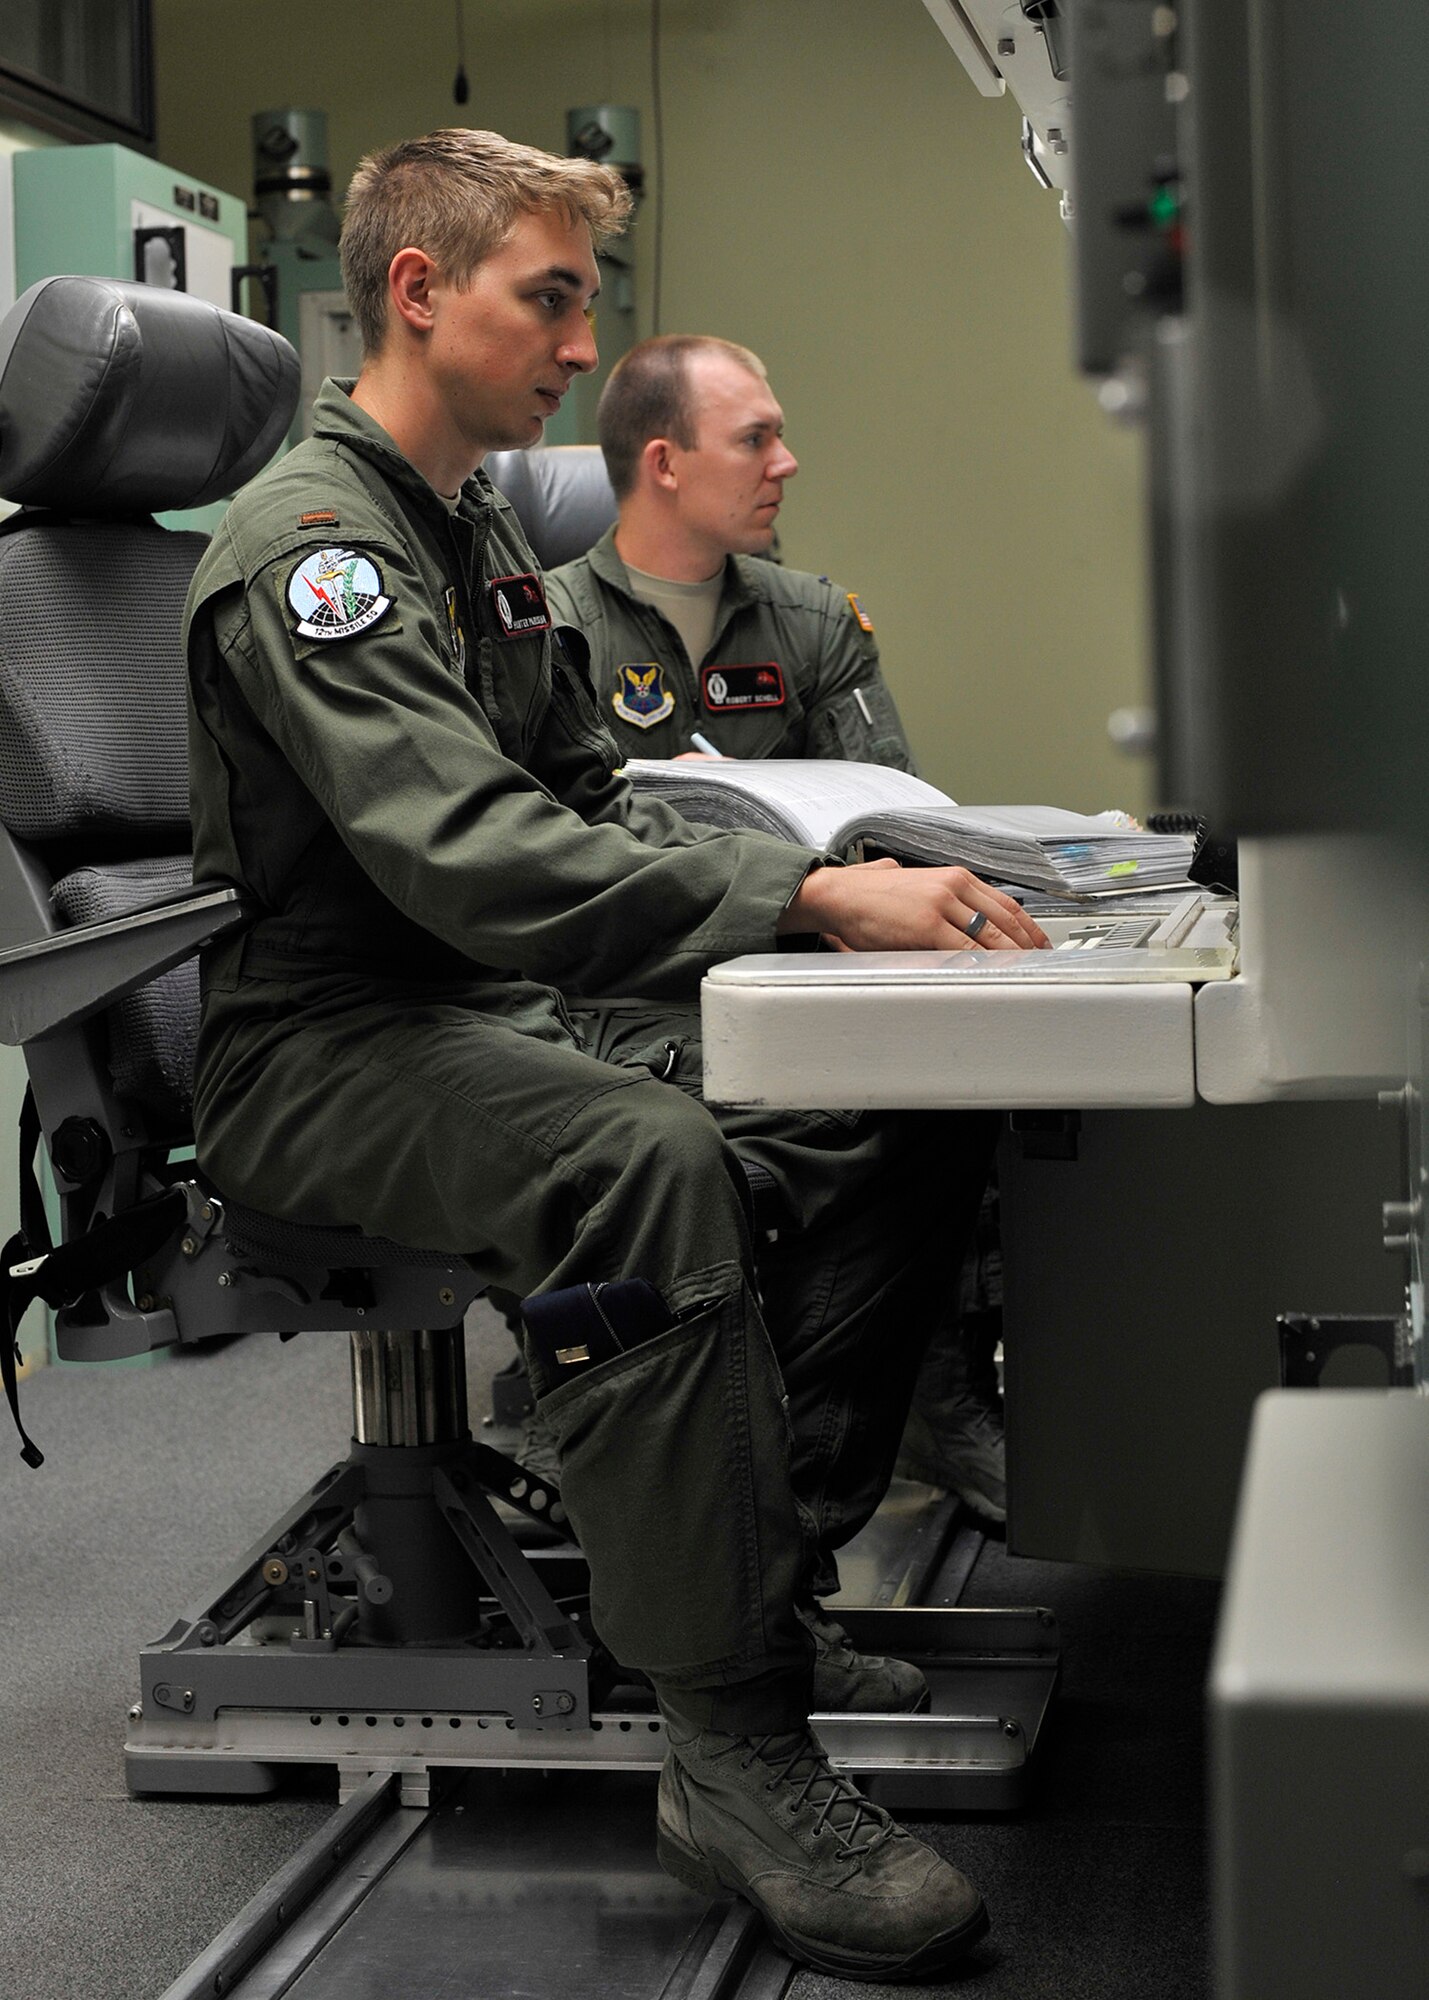 2nd Lt. Hunter Parisian, 12th Missile Squadron deputy crew commander, left, and 1st Lt. Robert Schell, 12th MS crew commander, run a simulated emergency drill in the missile procedures trainer Aug. 8, 2015, during a training session at Malmstrom Air Force Base, Mont., for Global Strike Challenge 2015. The crew is one of three from the 341st Operations Group that will compete Aug. 31 against Minot AFB, N.D., and F.E. Warren AFB, Wyo., in Air Force Global Strike Command’s ICBM Operations competition. (U.S. Air Force photo/ John Turner)